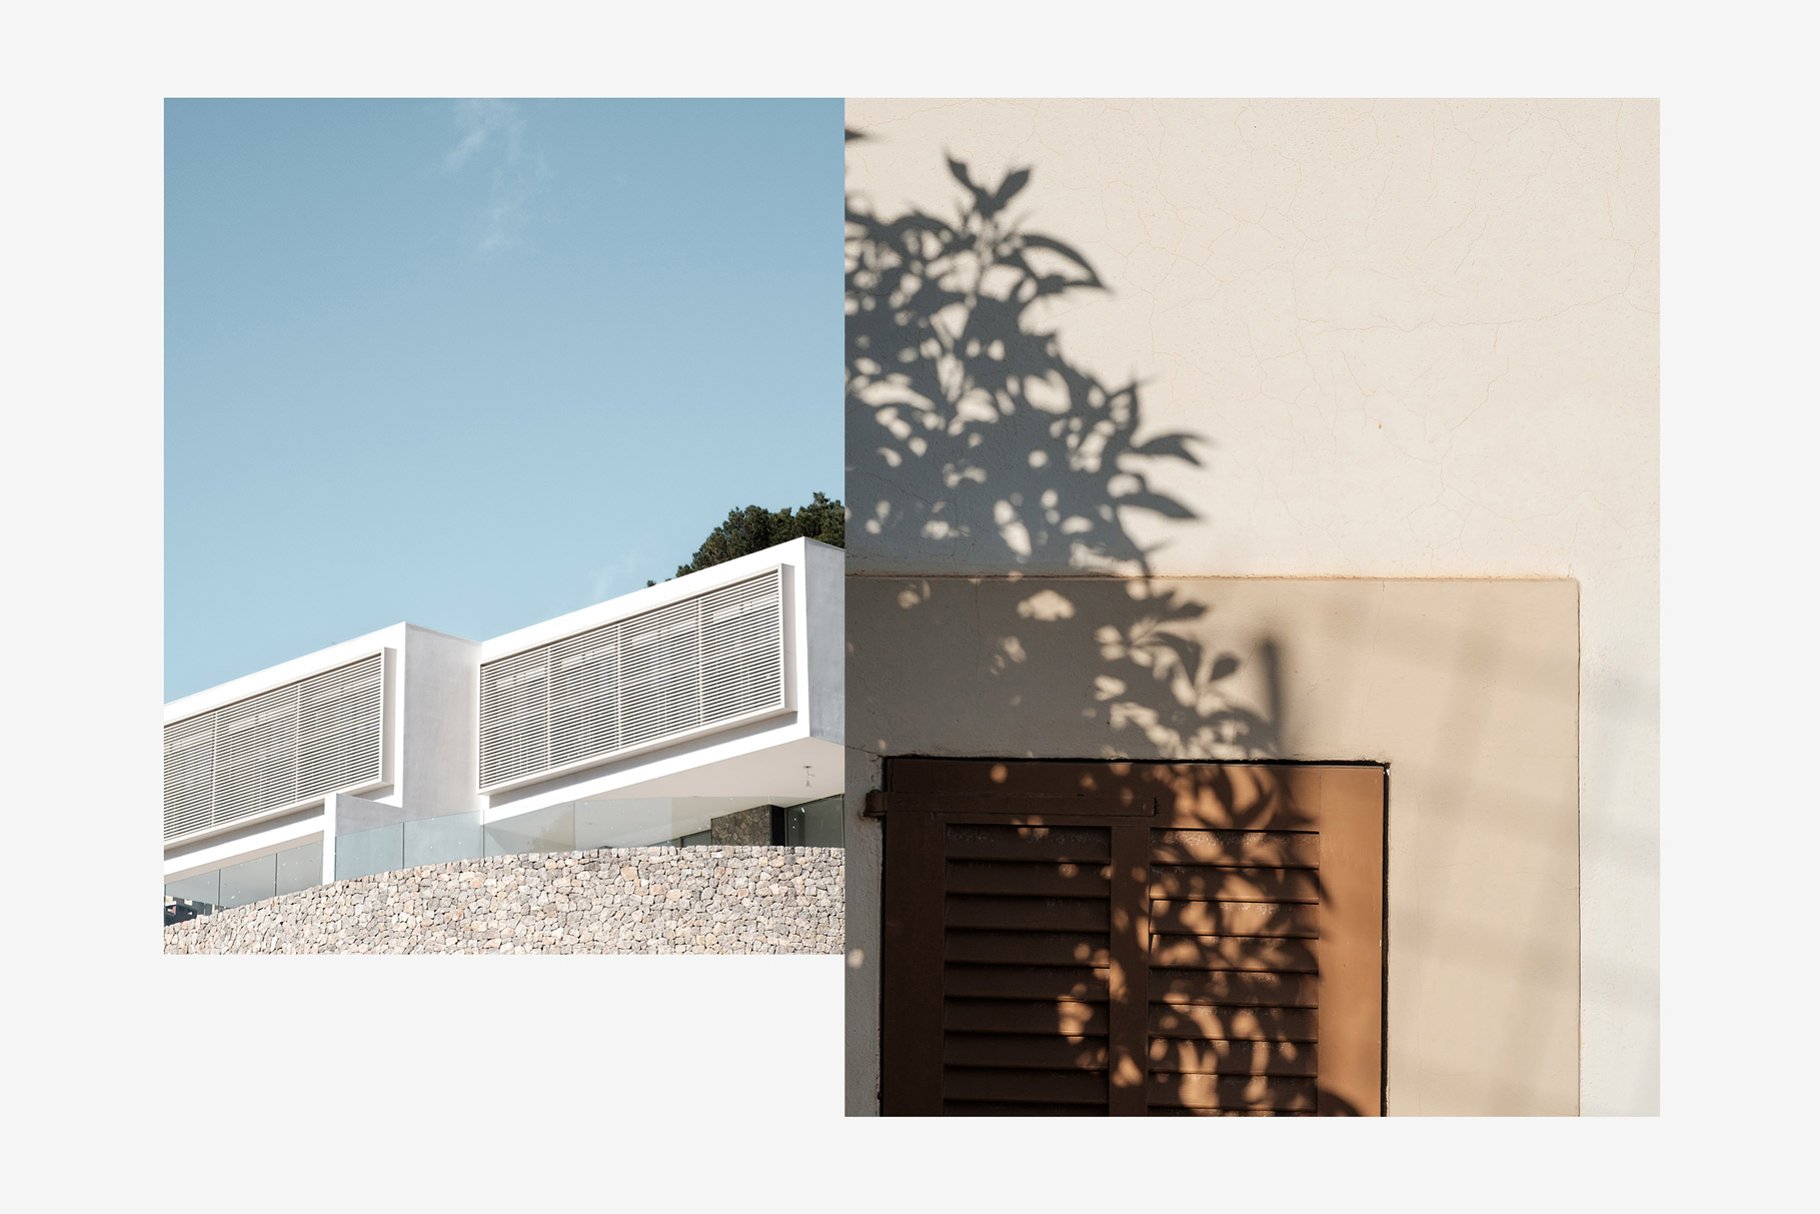 2 minimalist photos - facade of the building against the sky, a window with a wooden insert and a shadow from a plant.